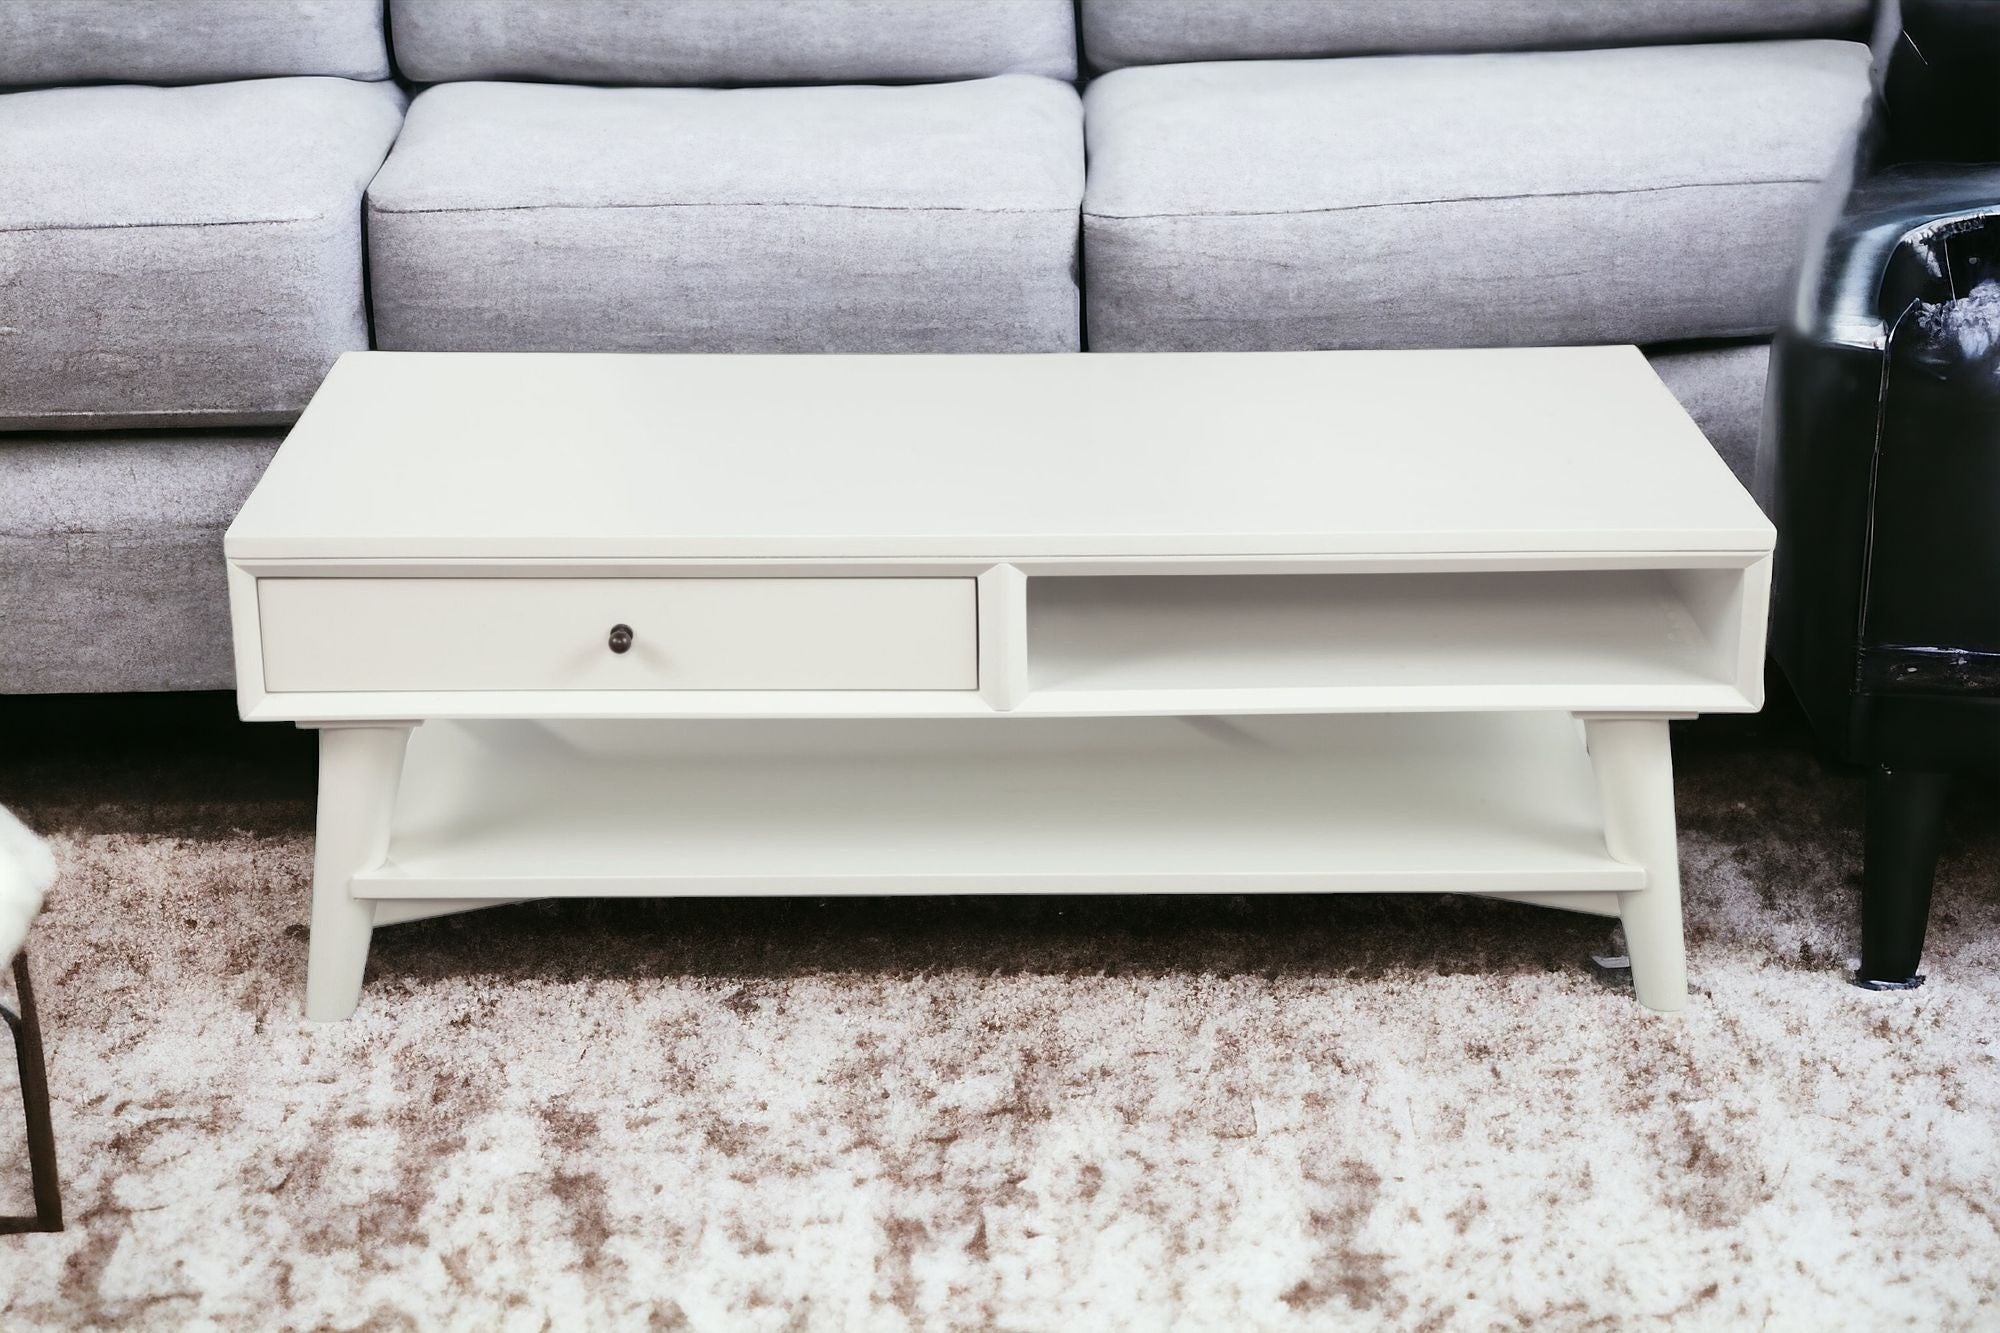 48" White Solid And Manufactured Wood Coffee Table With Drawer